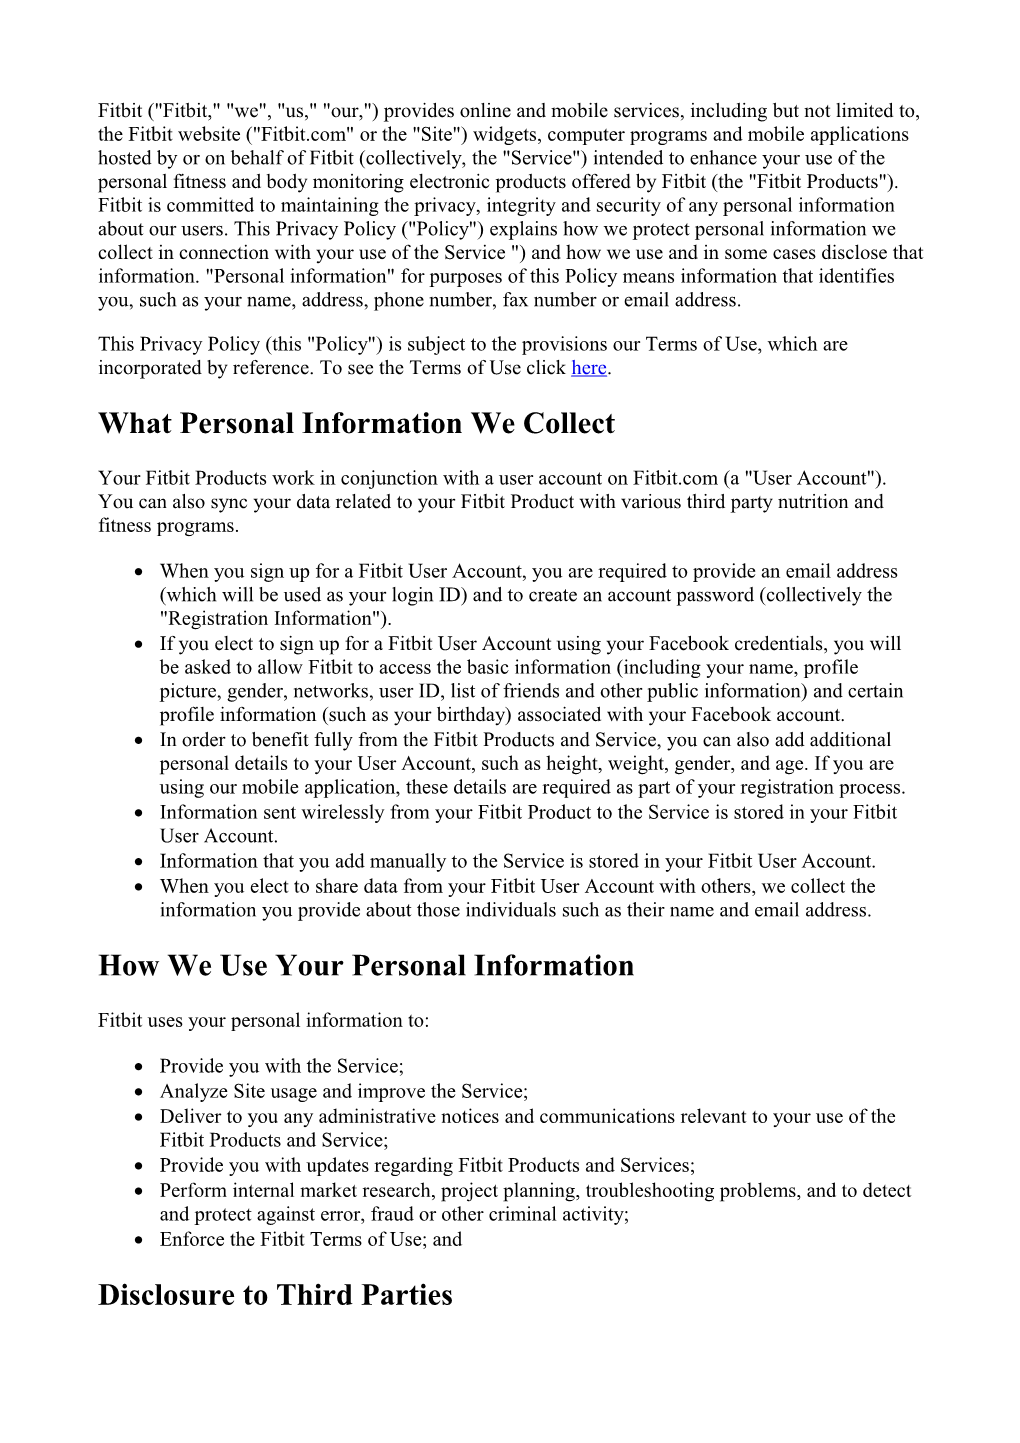 What Personal Information We Collect